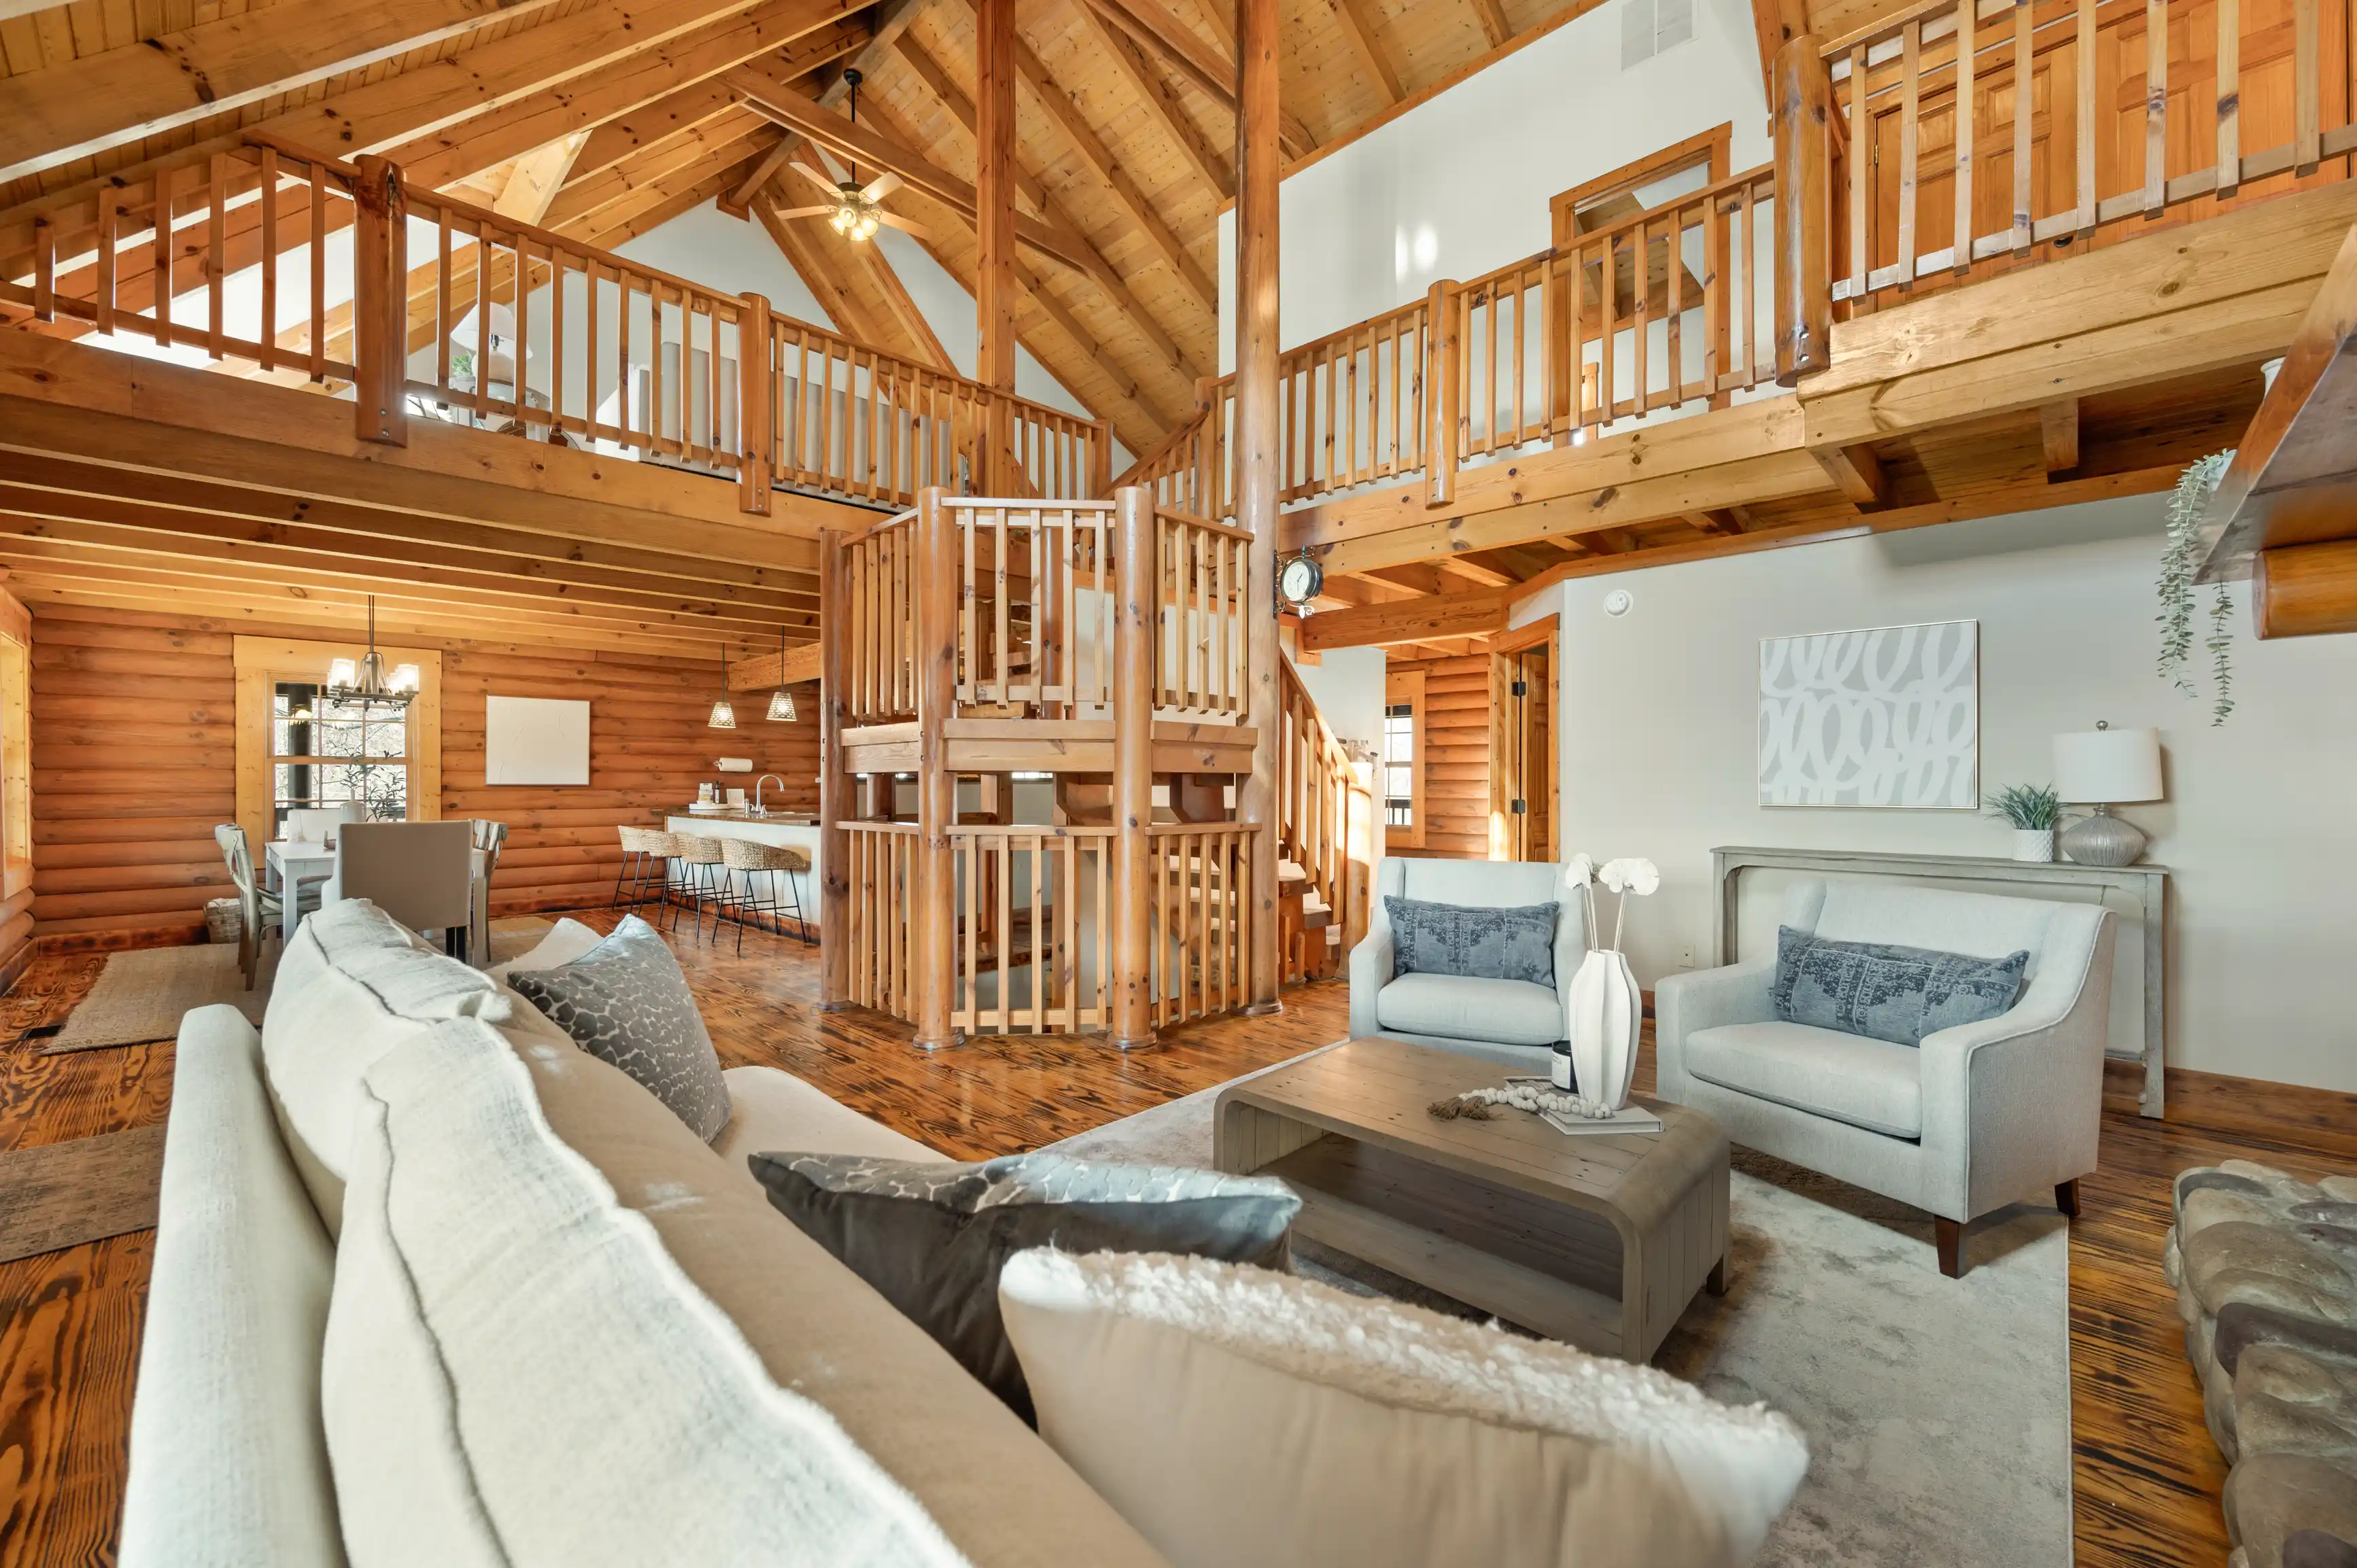 Spacious log cabin interior with a high vaulted ceiling, exposed wooden beams, and a loft area, featuring a cozy living room setup with sofas and a dining space in the background.